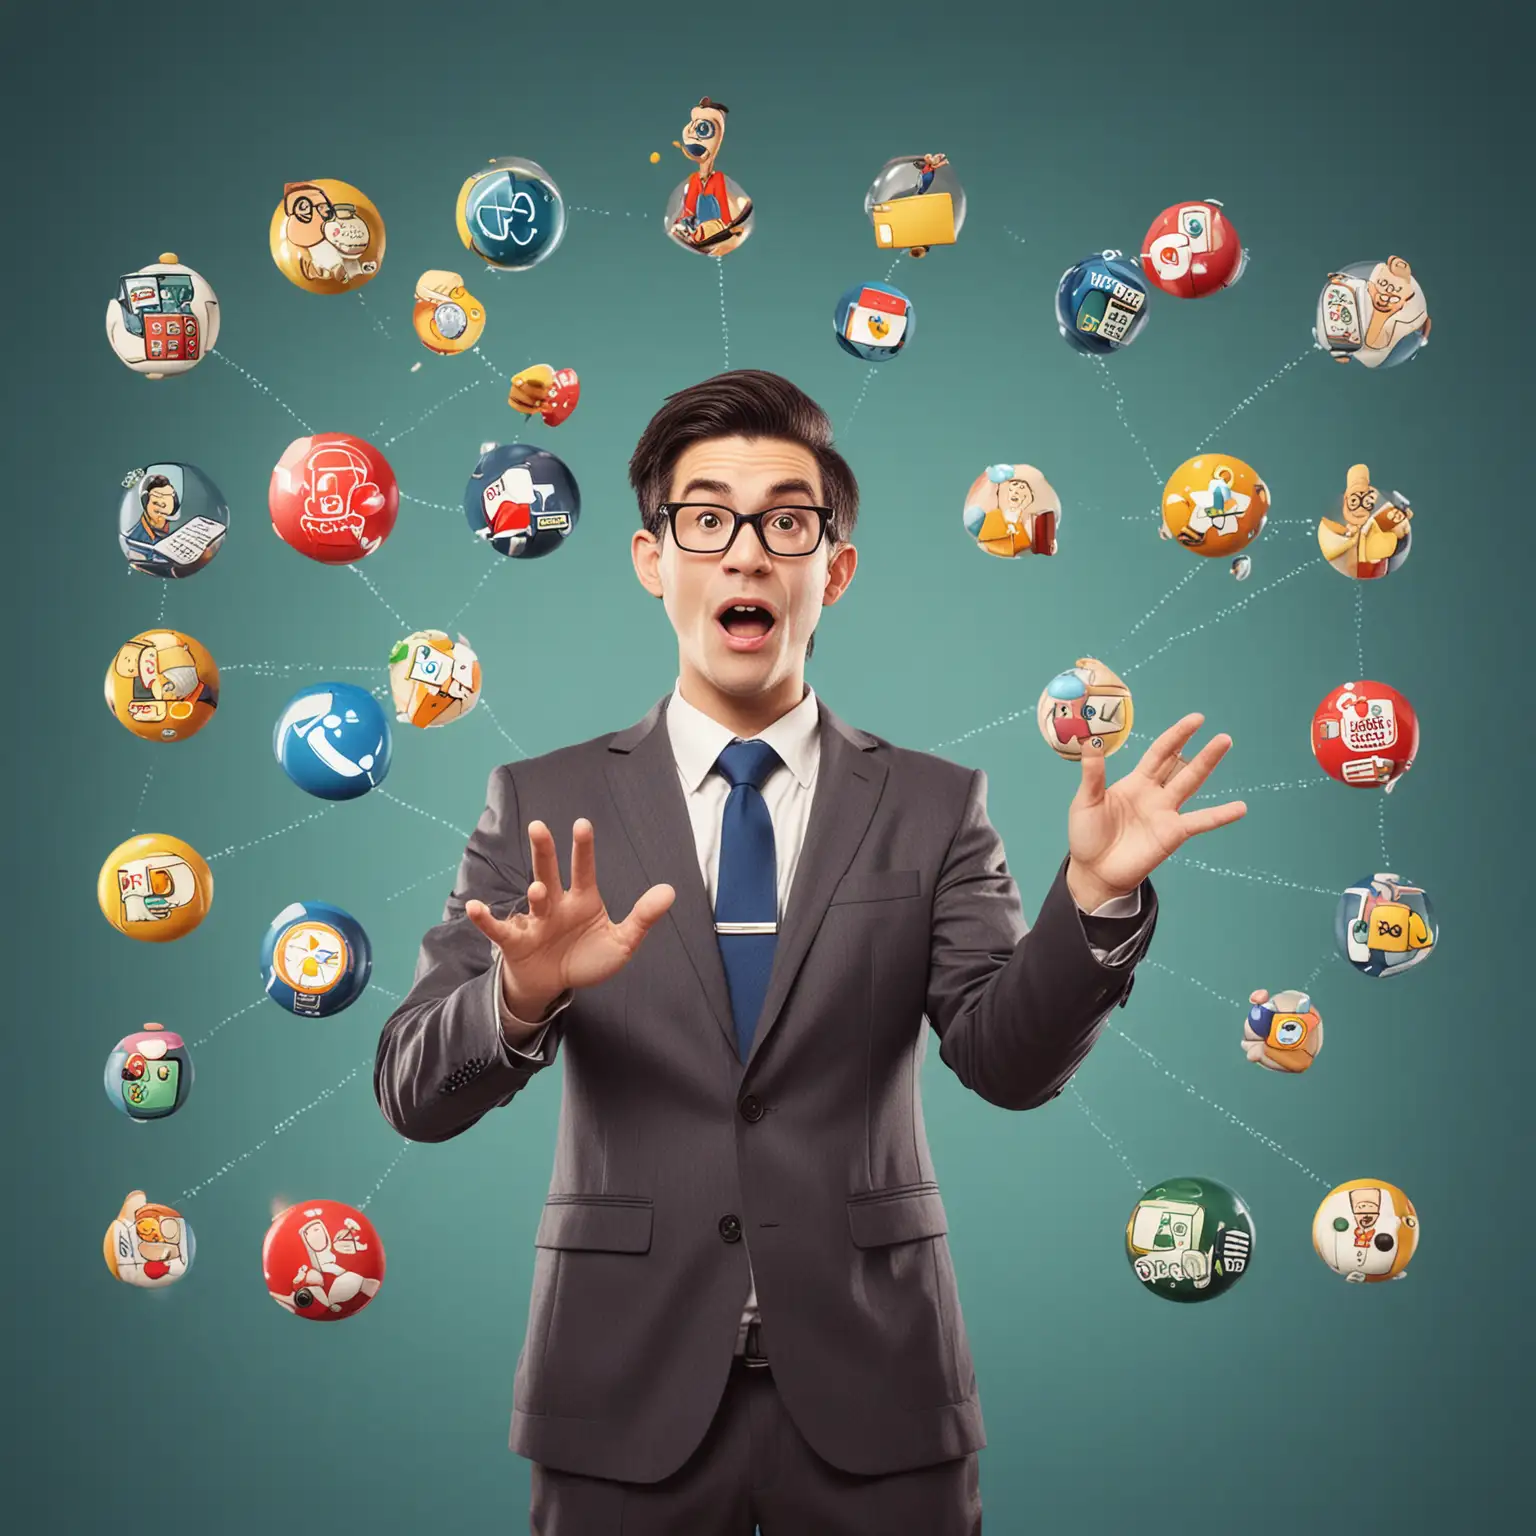 A person juggling various business icons, cartoon style, humorous, shot with a DSLR camera, 24mm lens, bright and colorful, with a slight blur effect on icons